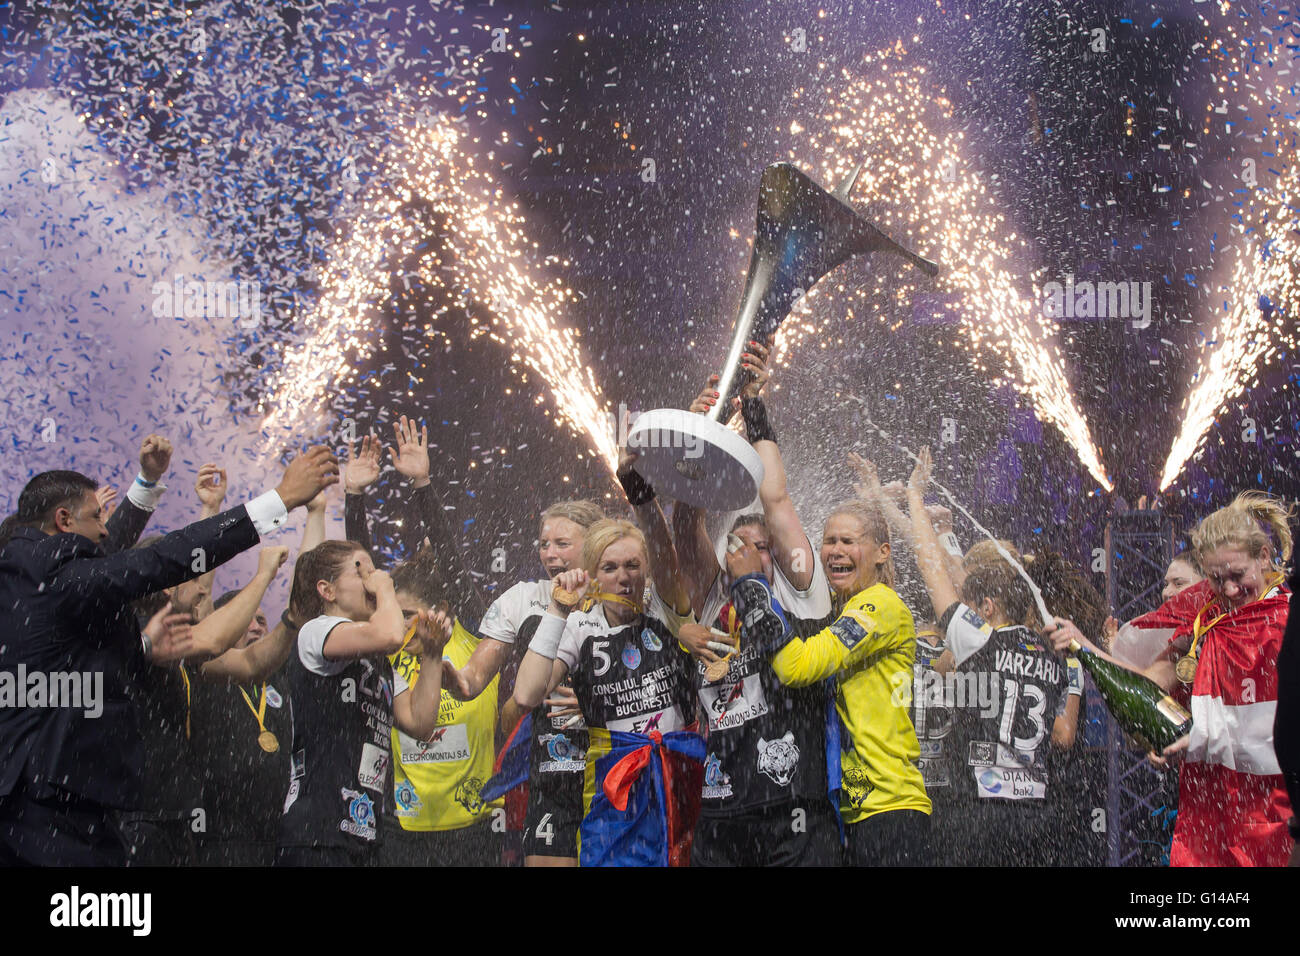 Budapest, Hungary. 8th May, 2016. Members of Romania's CSM Bucuresti celebrate their victory in the Women'EHF Champions League Final Four competition against Hungary's Gyori Audi ETO KC at the Papp Laszlo Sports Arena in Budapest, Hungary, May 8, 2016. © Attila Volgyi/Xinhua/Alamy Live News Stock Photo